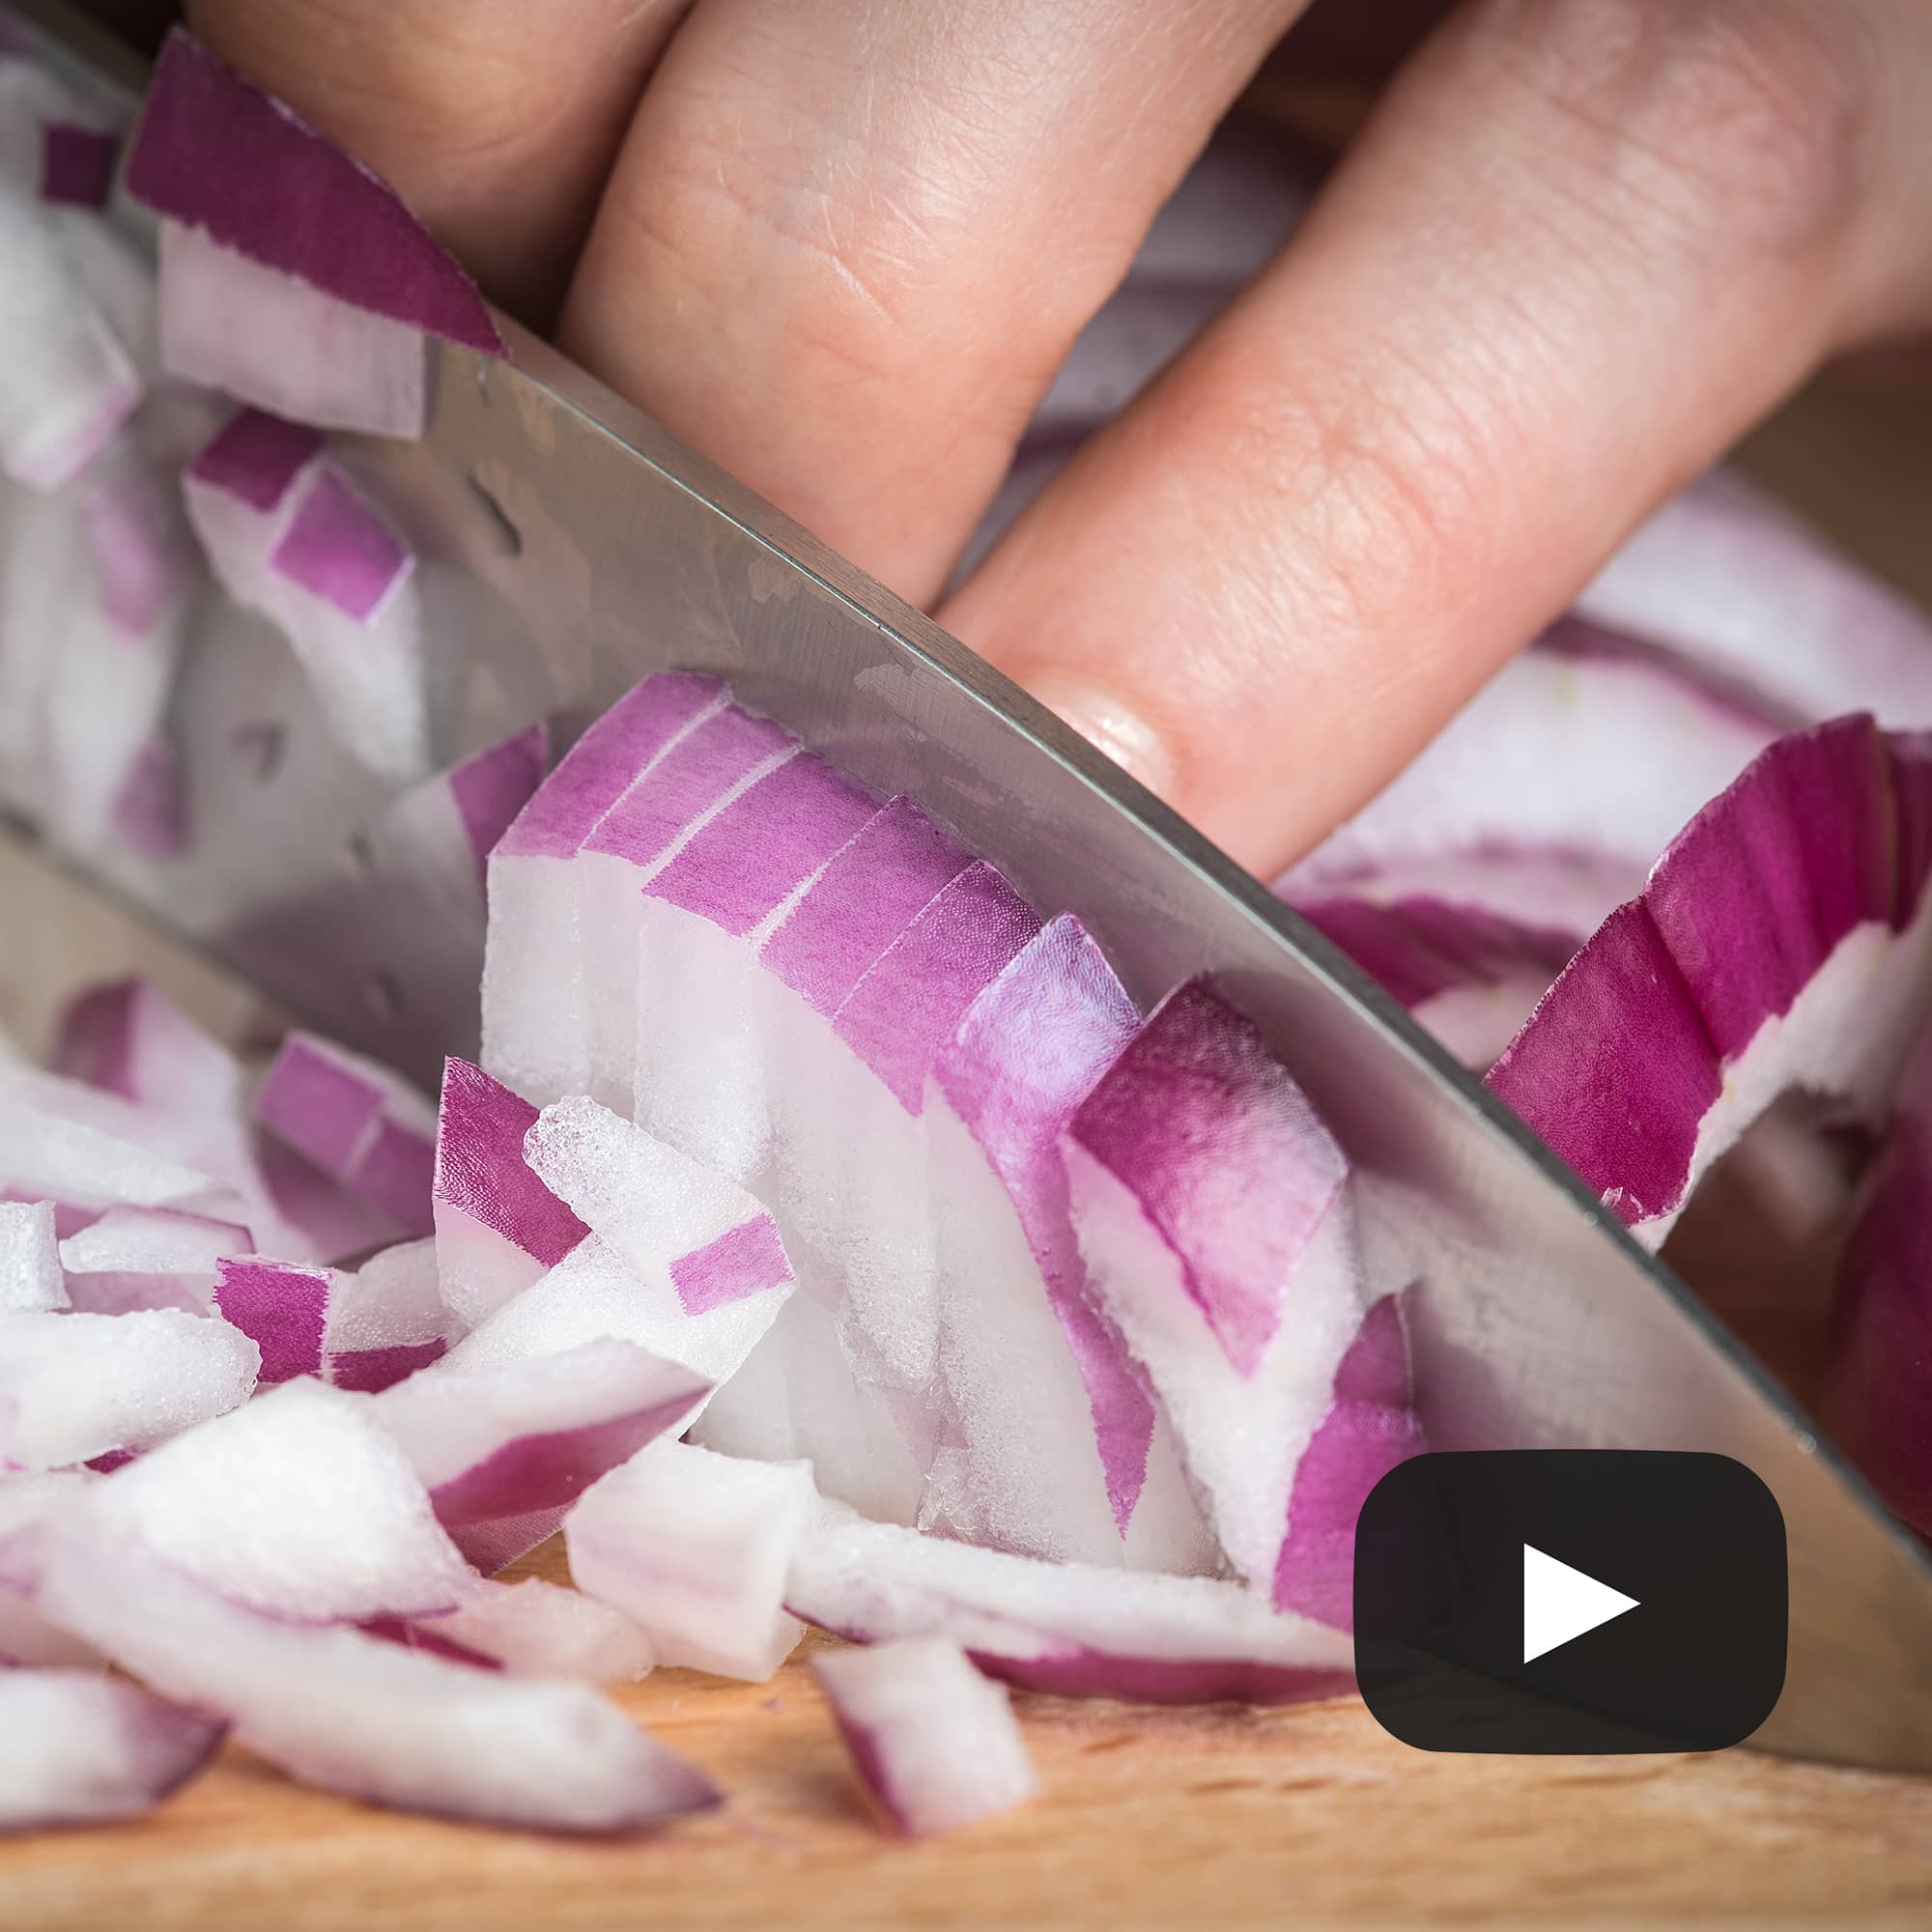 Chopping red onion